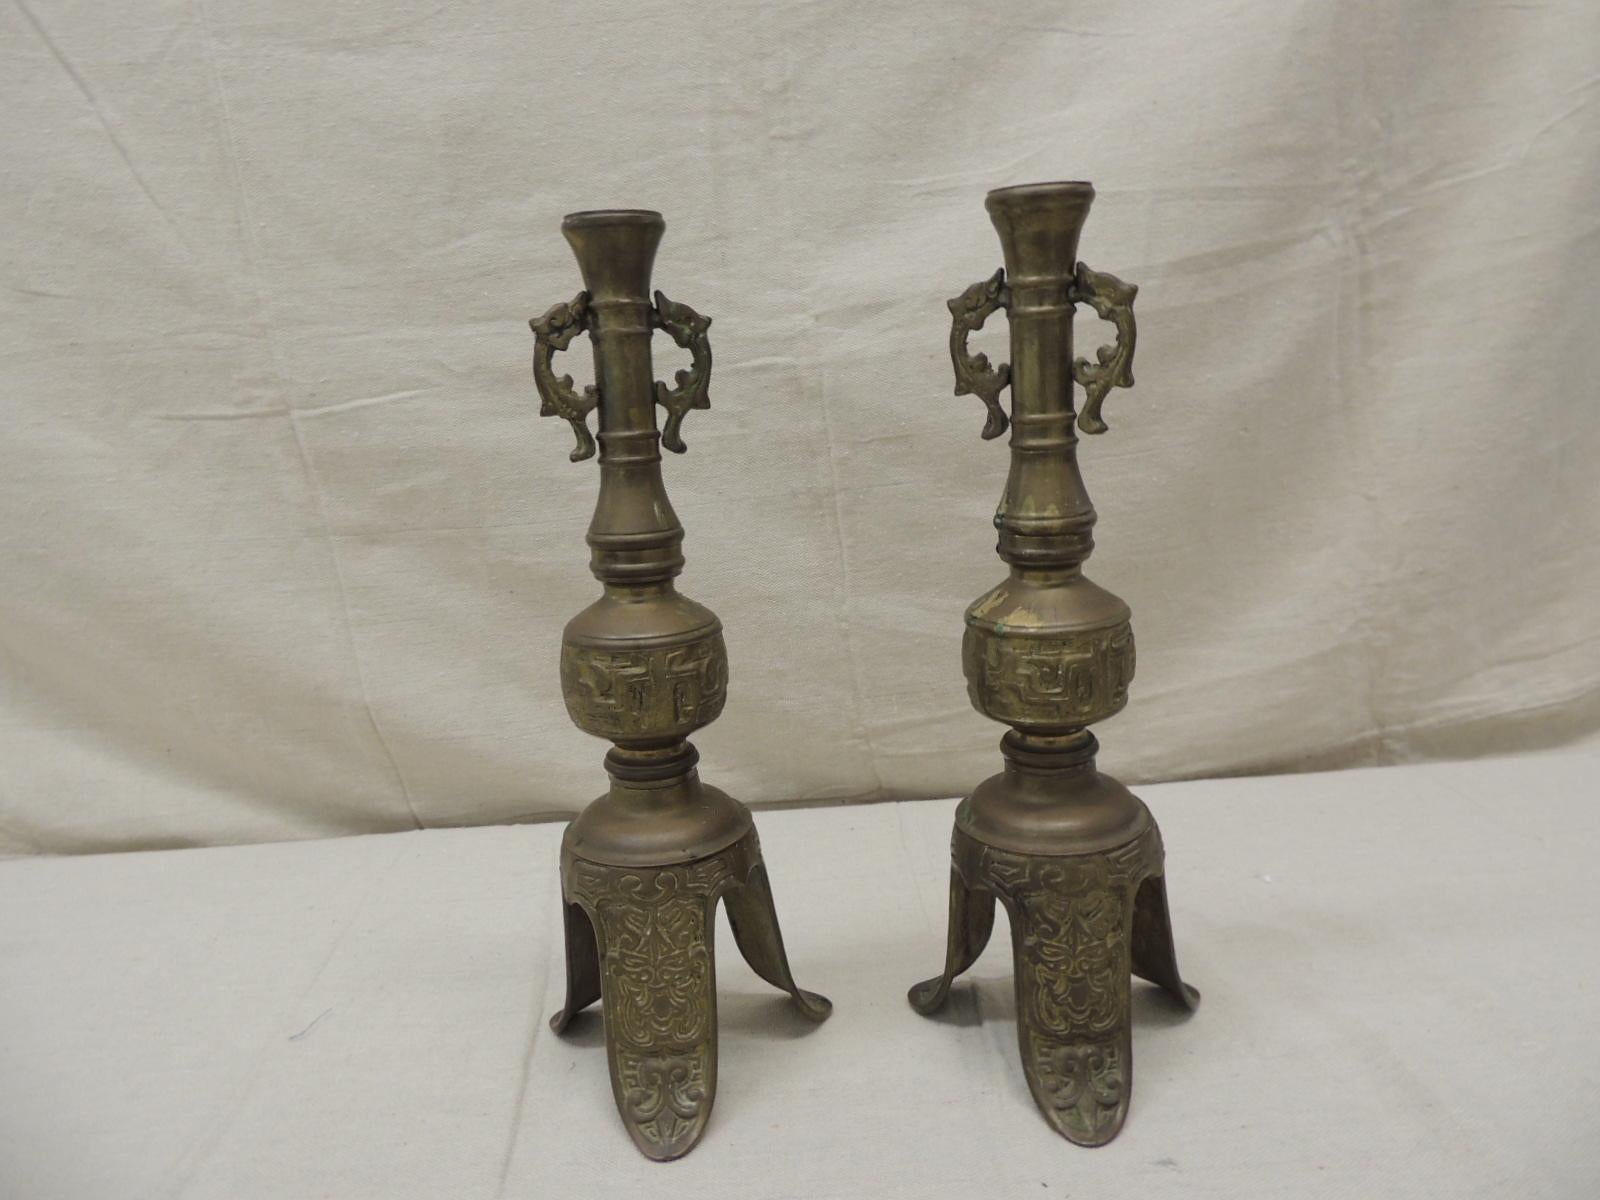 Pair of vintage brass Asian candleholders.
Size: 13